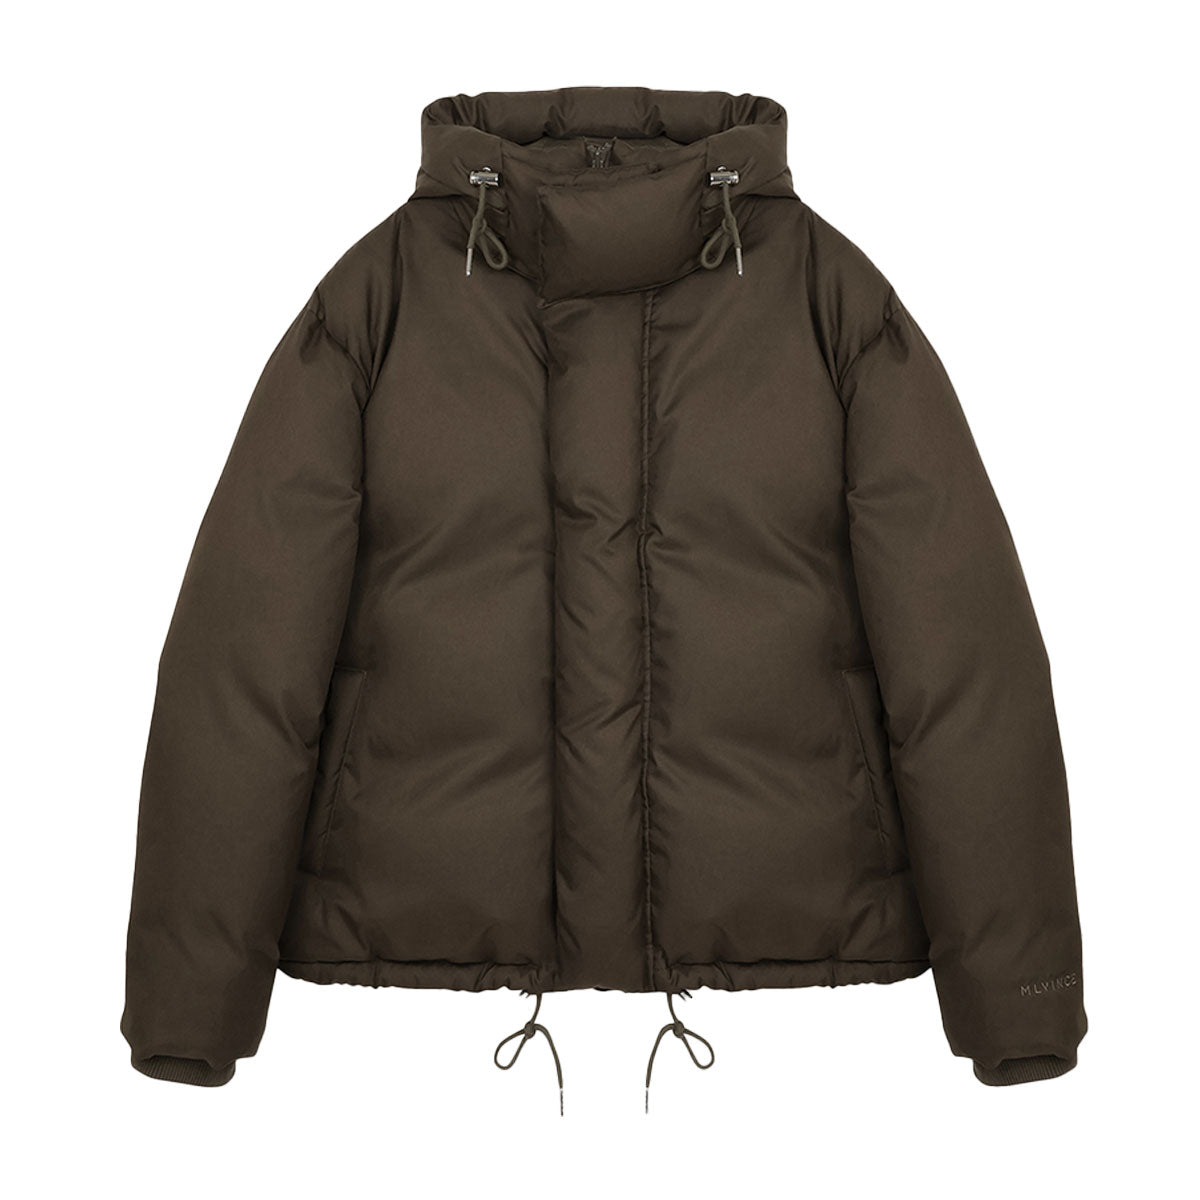 LIMONTA DOWN JACKET – Why are you here?